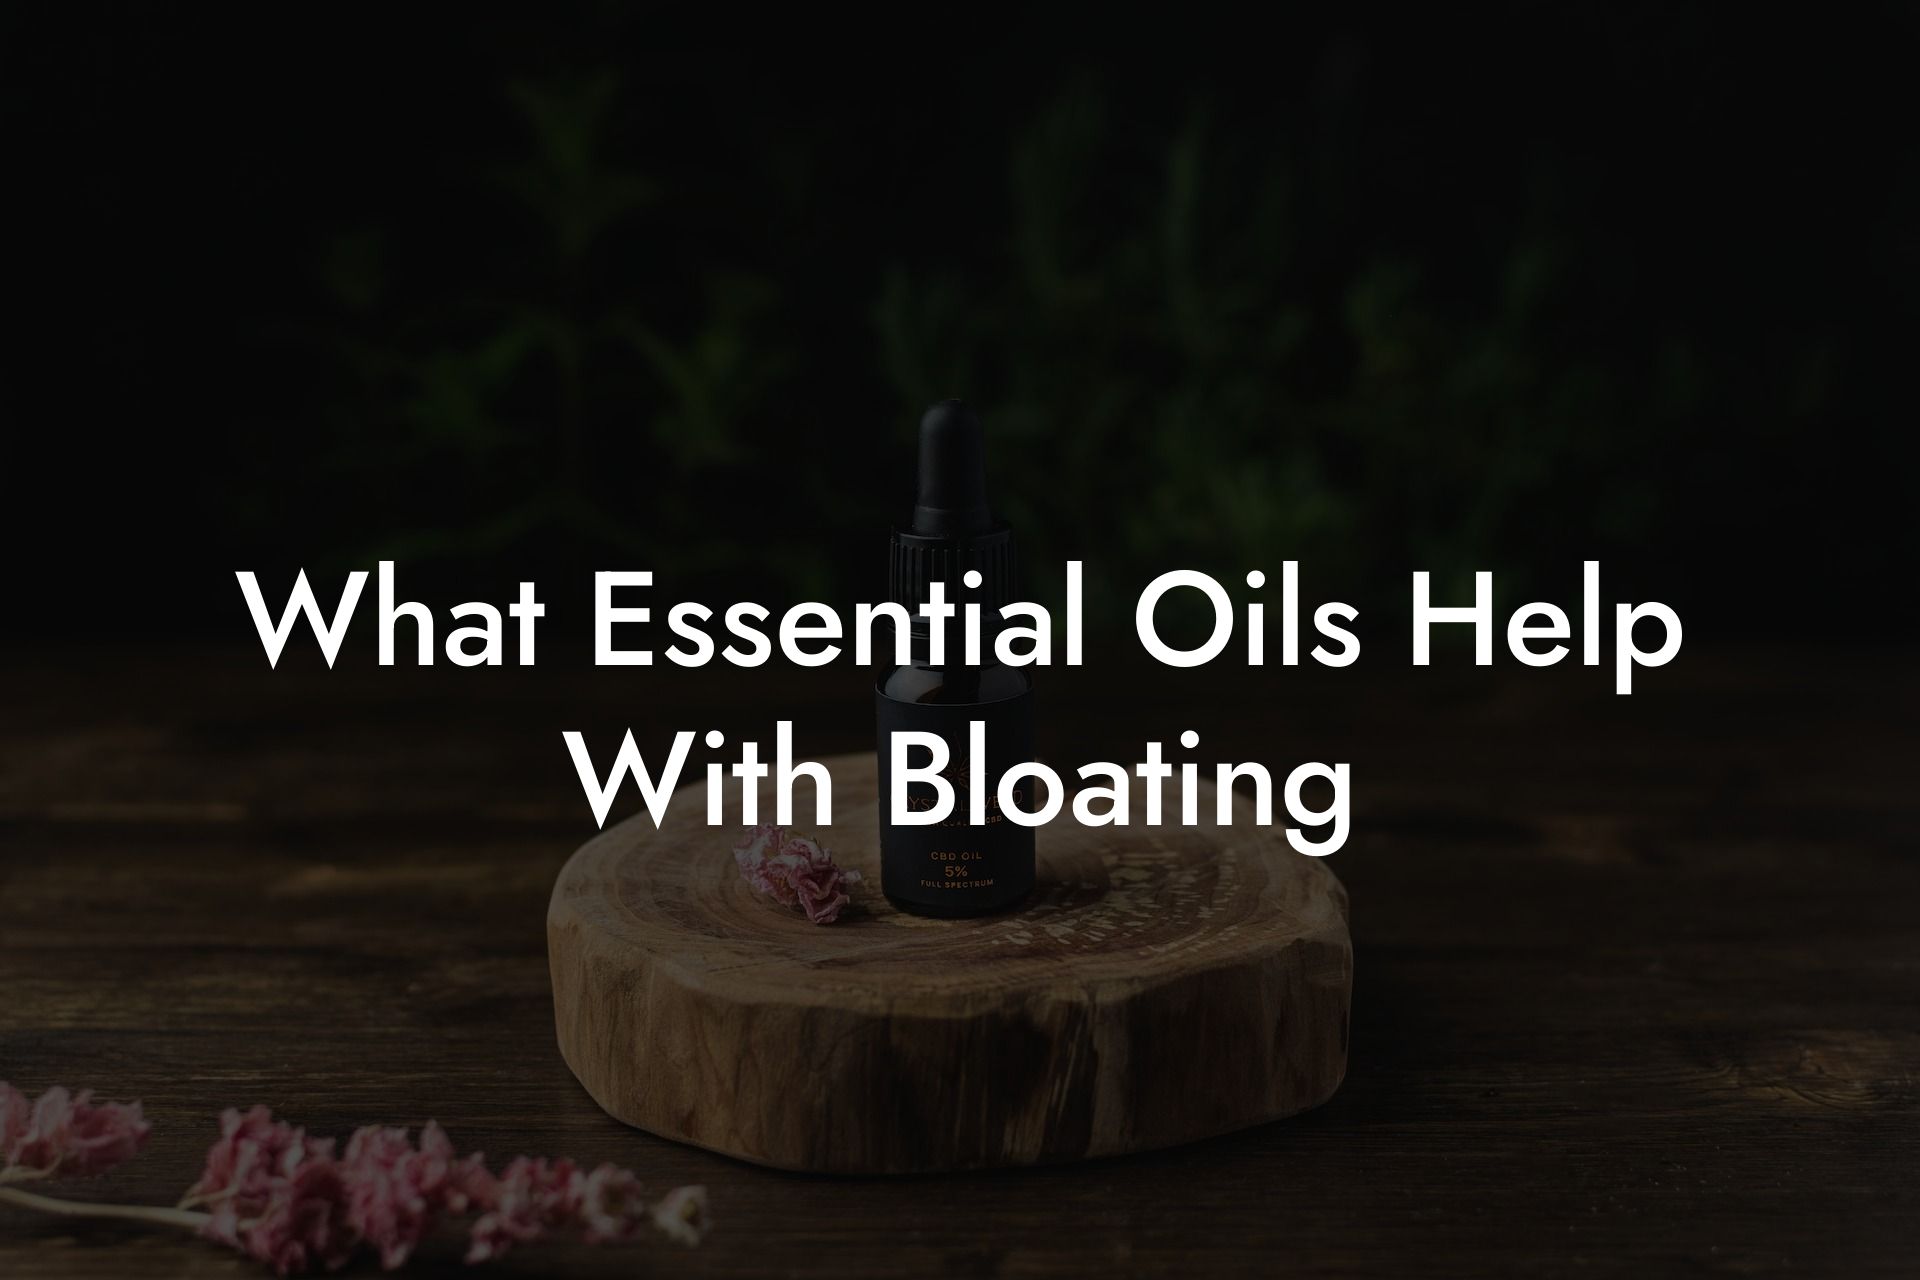 What Essential Oils Help With Bloating